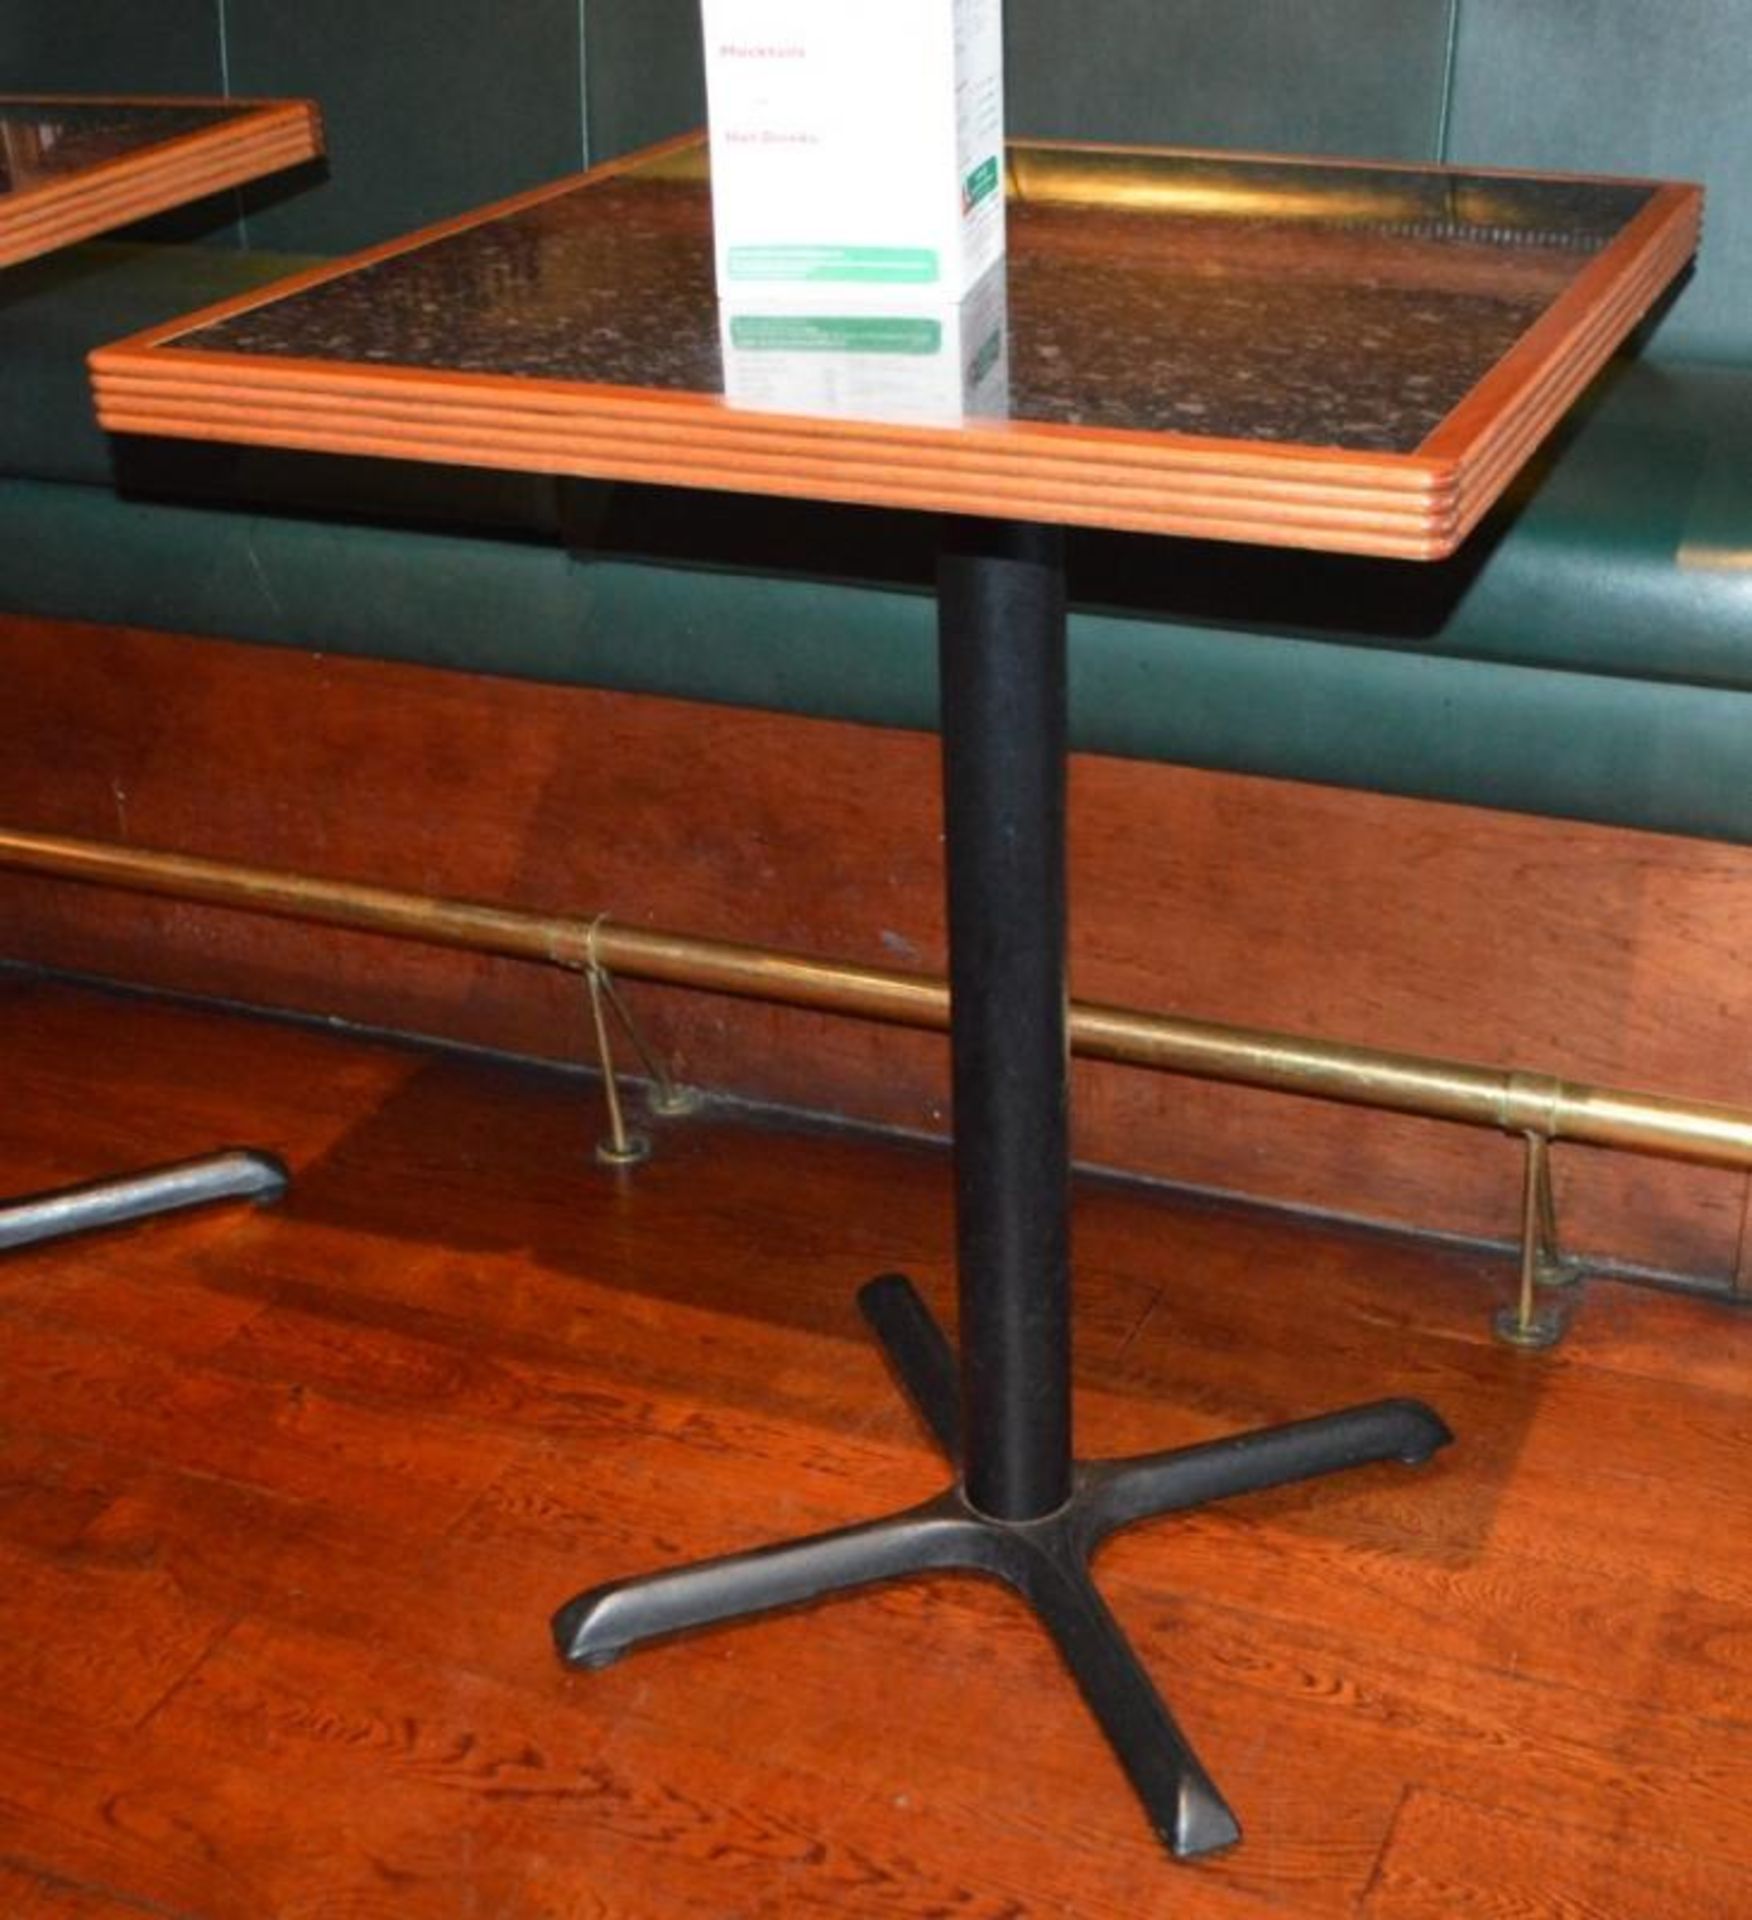 2 x Poser Bar Tables With Granite Effect Surface, Wooden Edging and Cast Iron Bases - H104 x W80 x D - Image 4 of 4